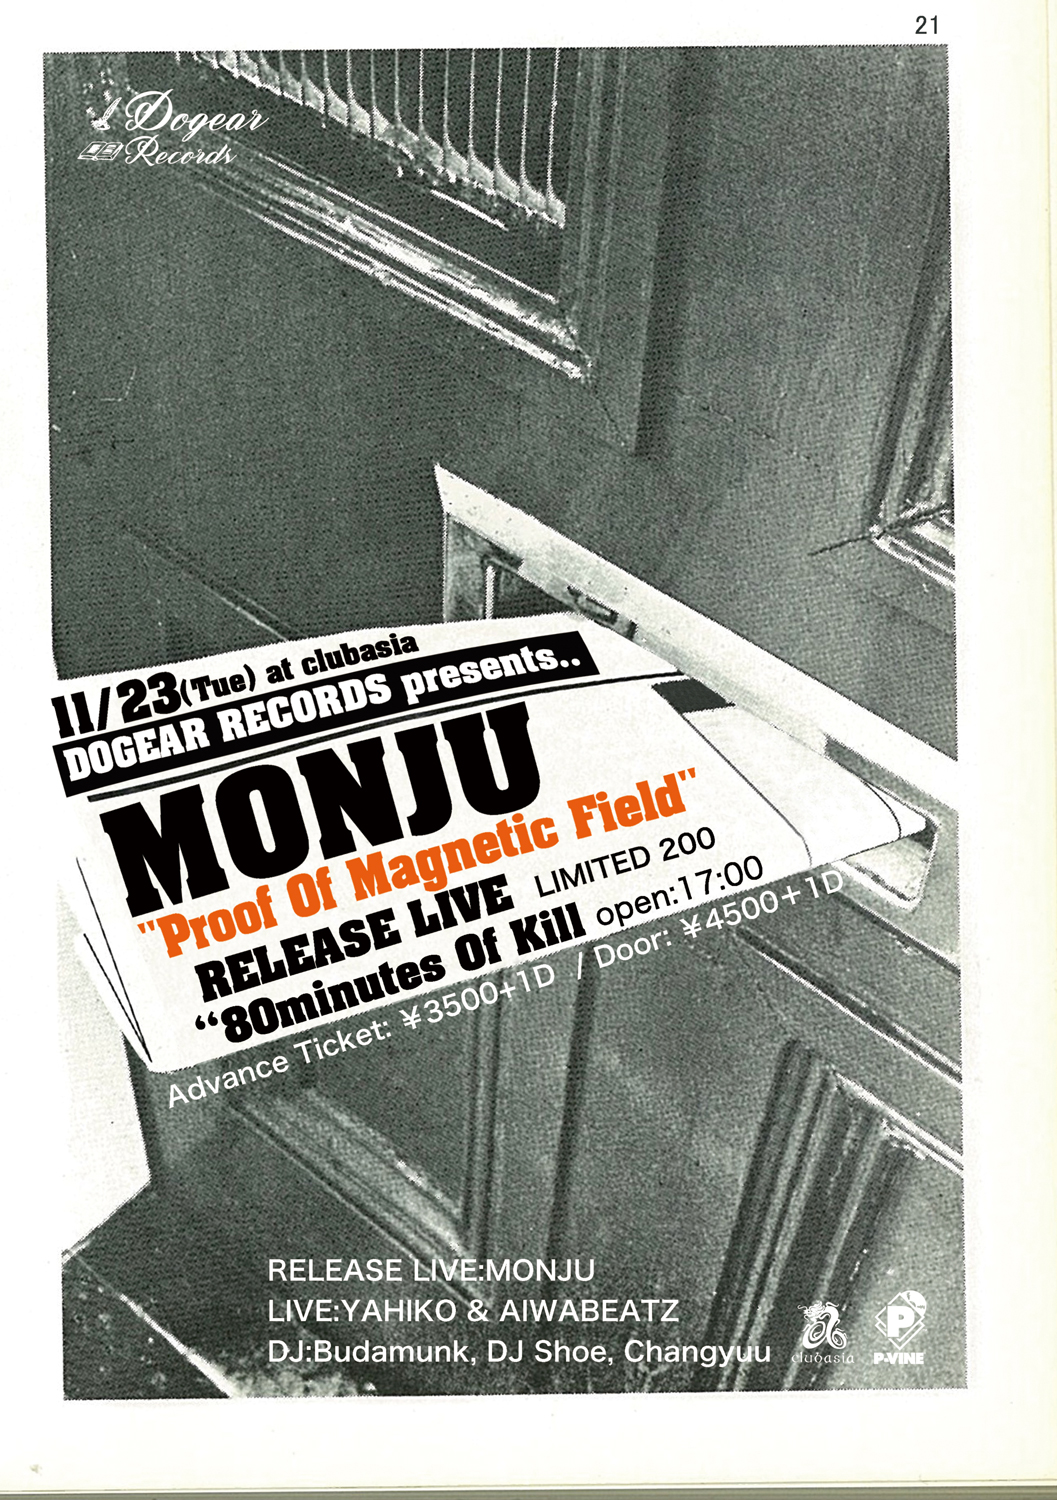 Dogear Records Presents MONJU "Proof Of Magnetic Field" Release Live Limited 200 80minutes Of Kill